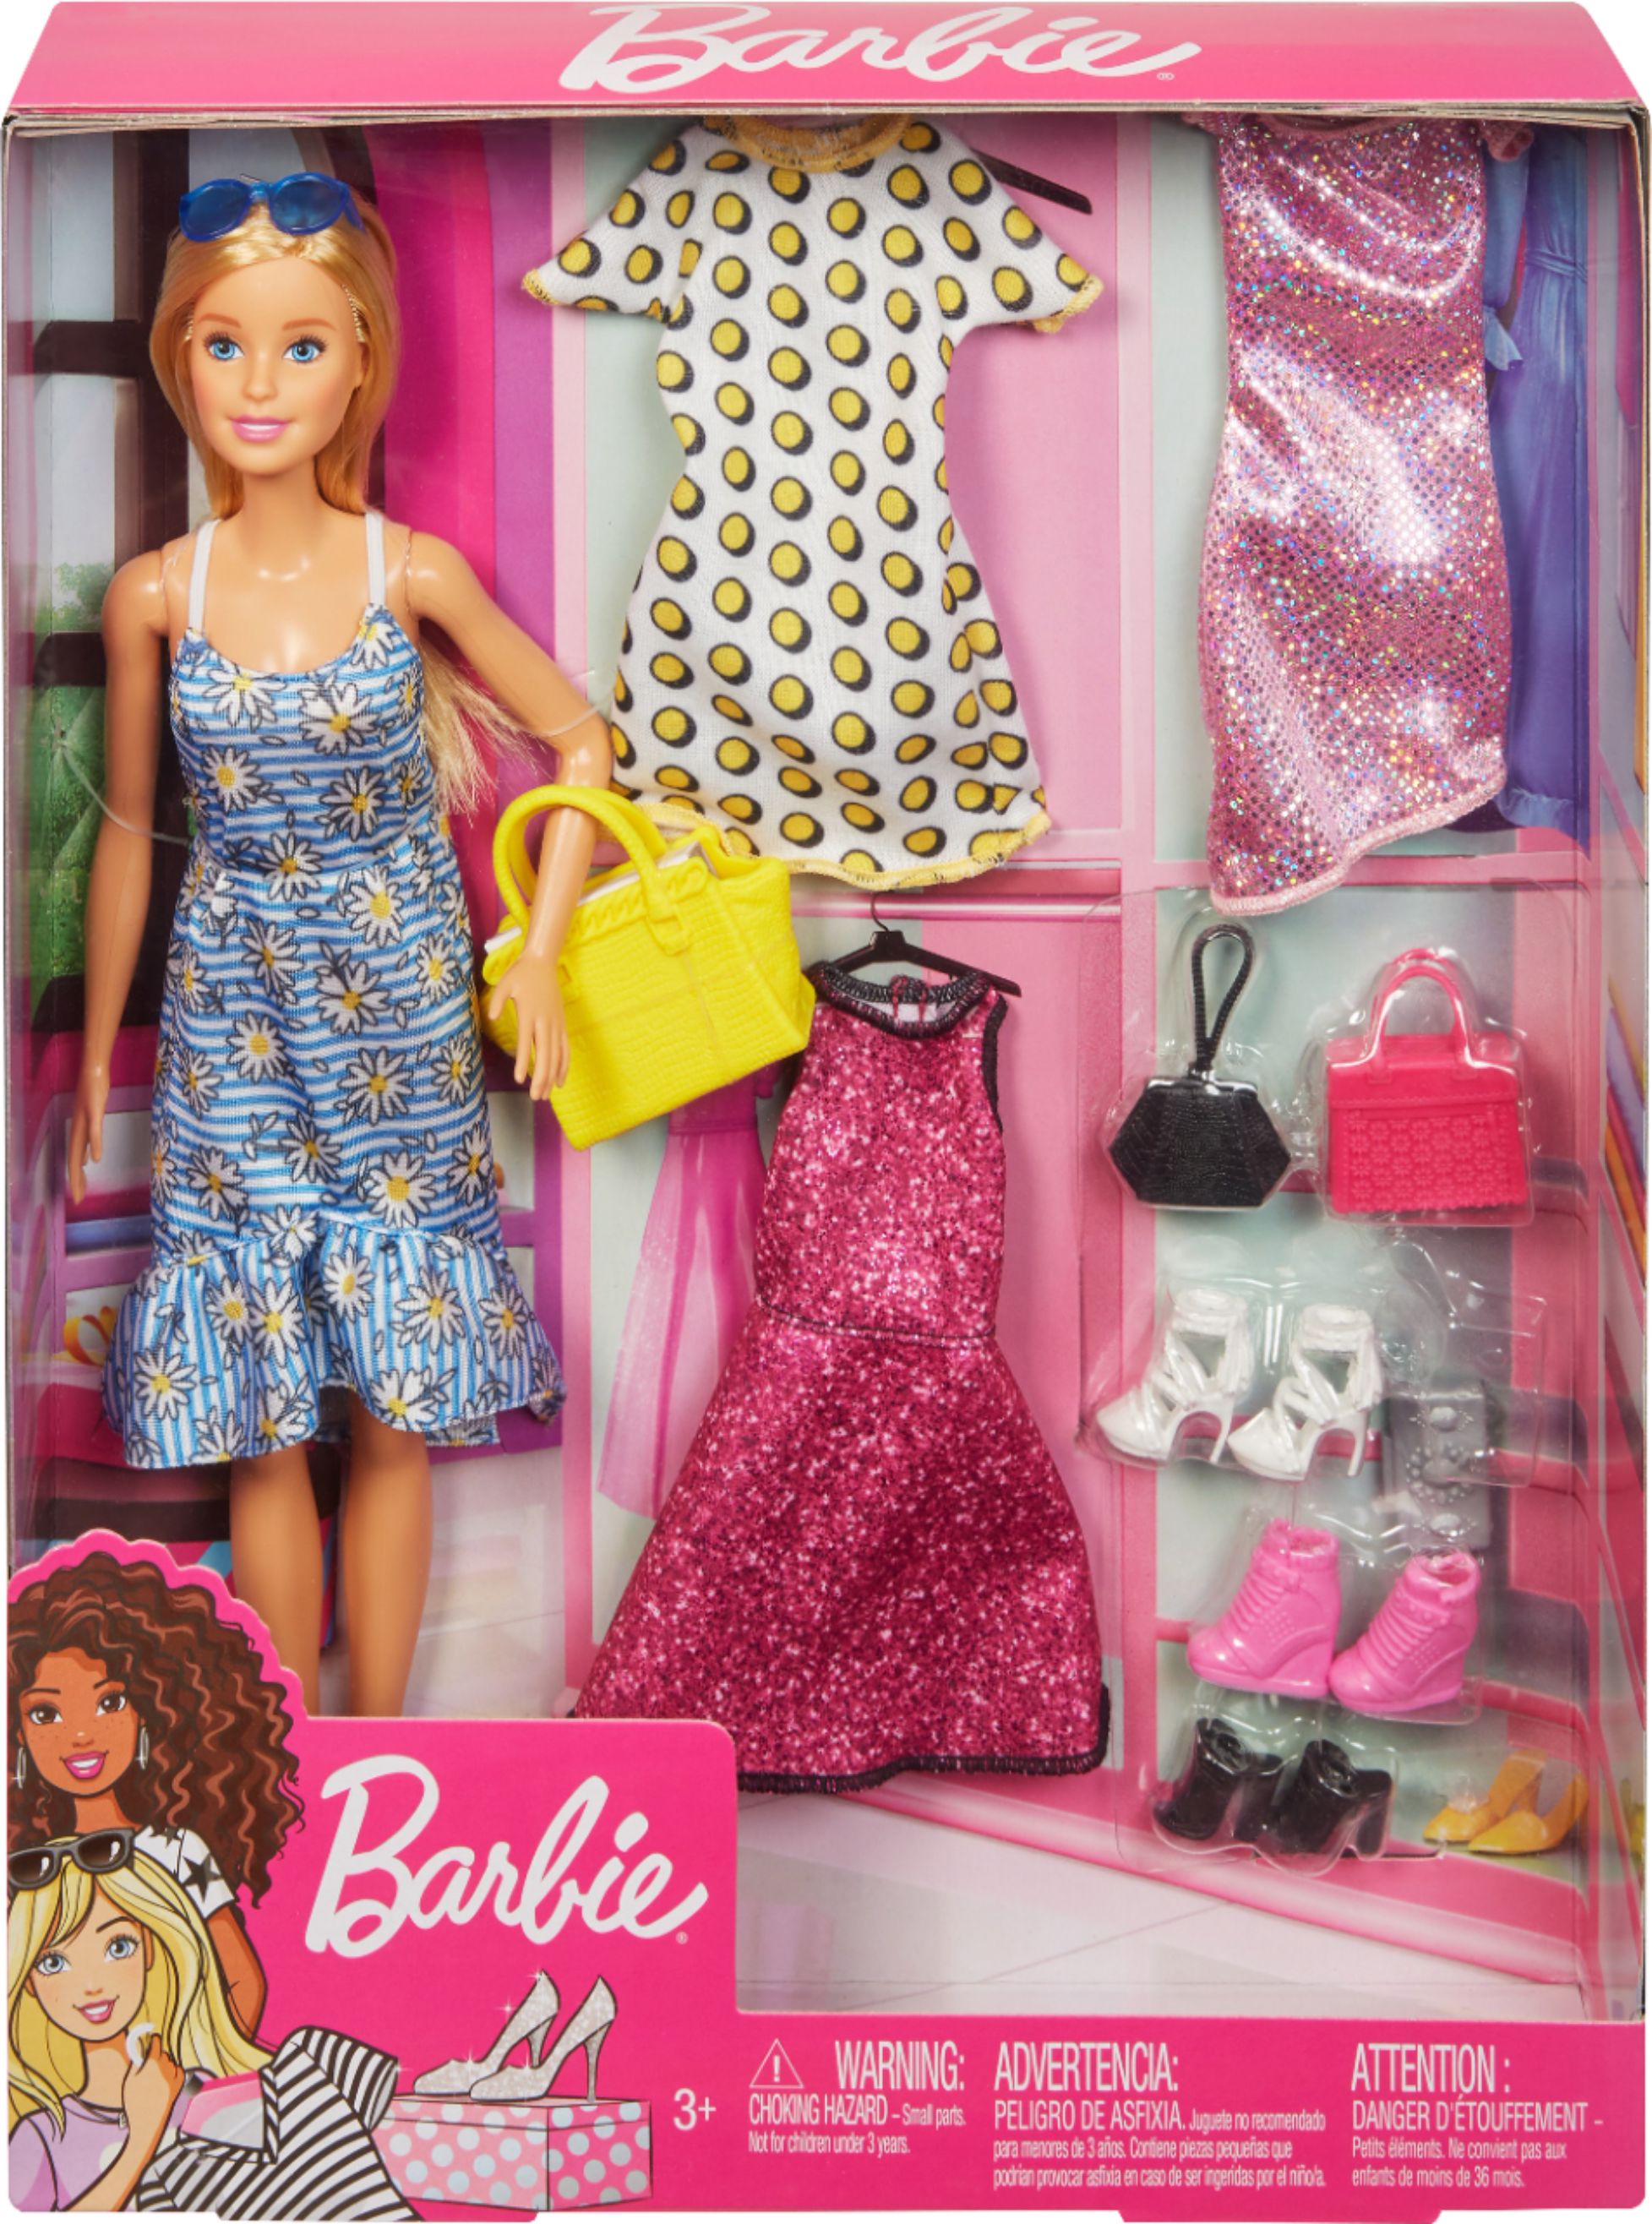 Barbie Doll price refers to 1 doll 